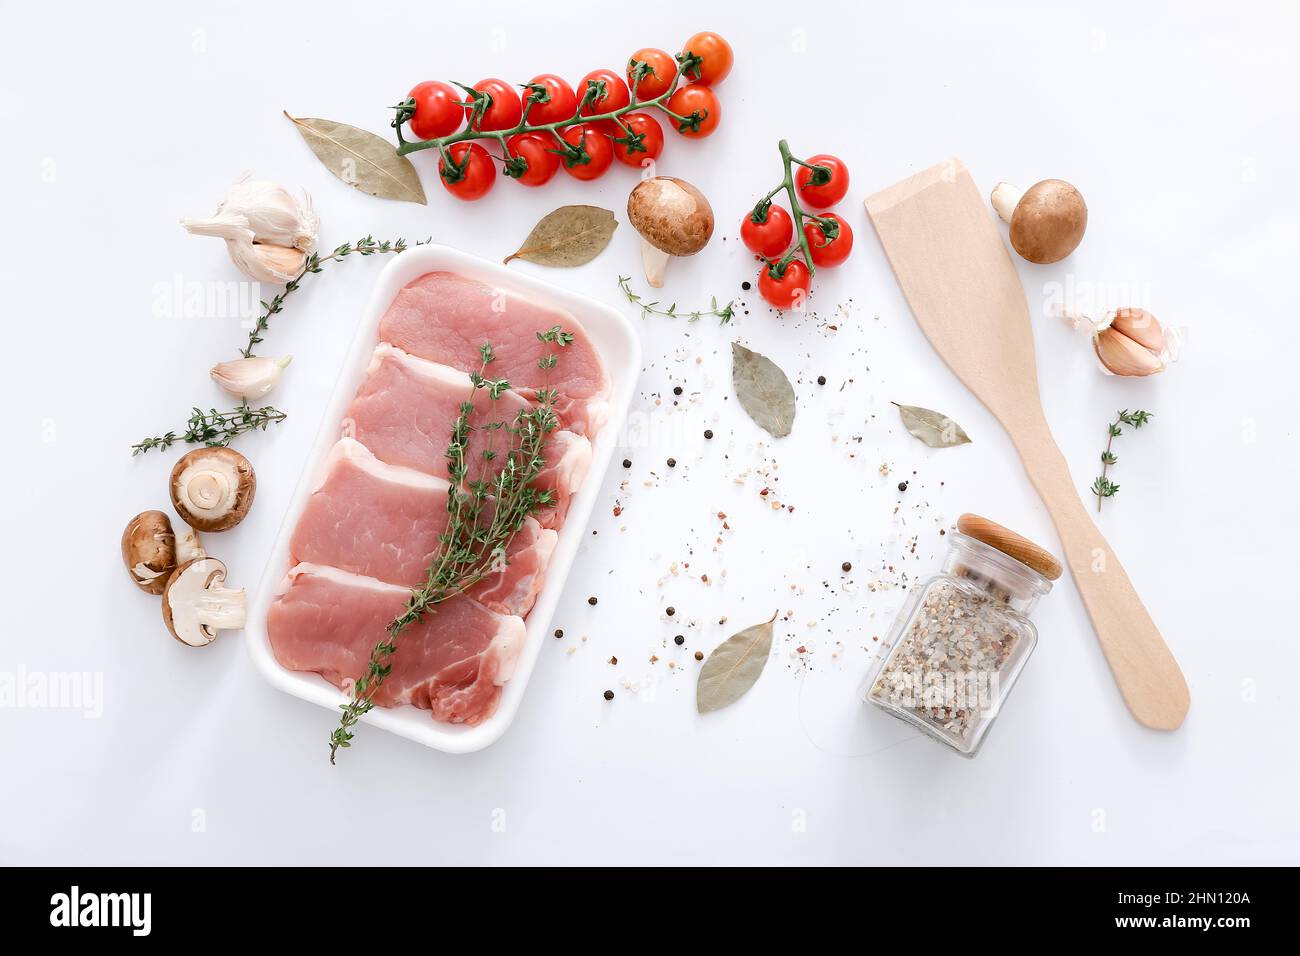 Raw meat and wooden spatula with different spices and vegetables on grey table background, top view Stock Photo